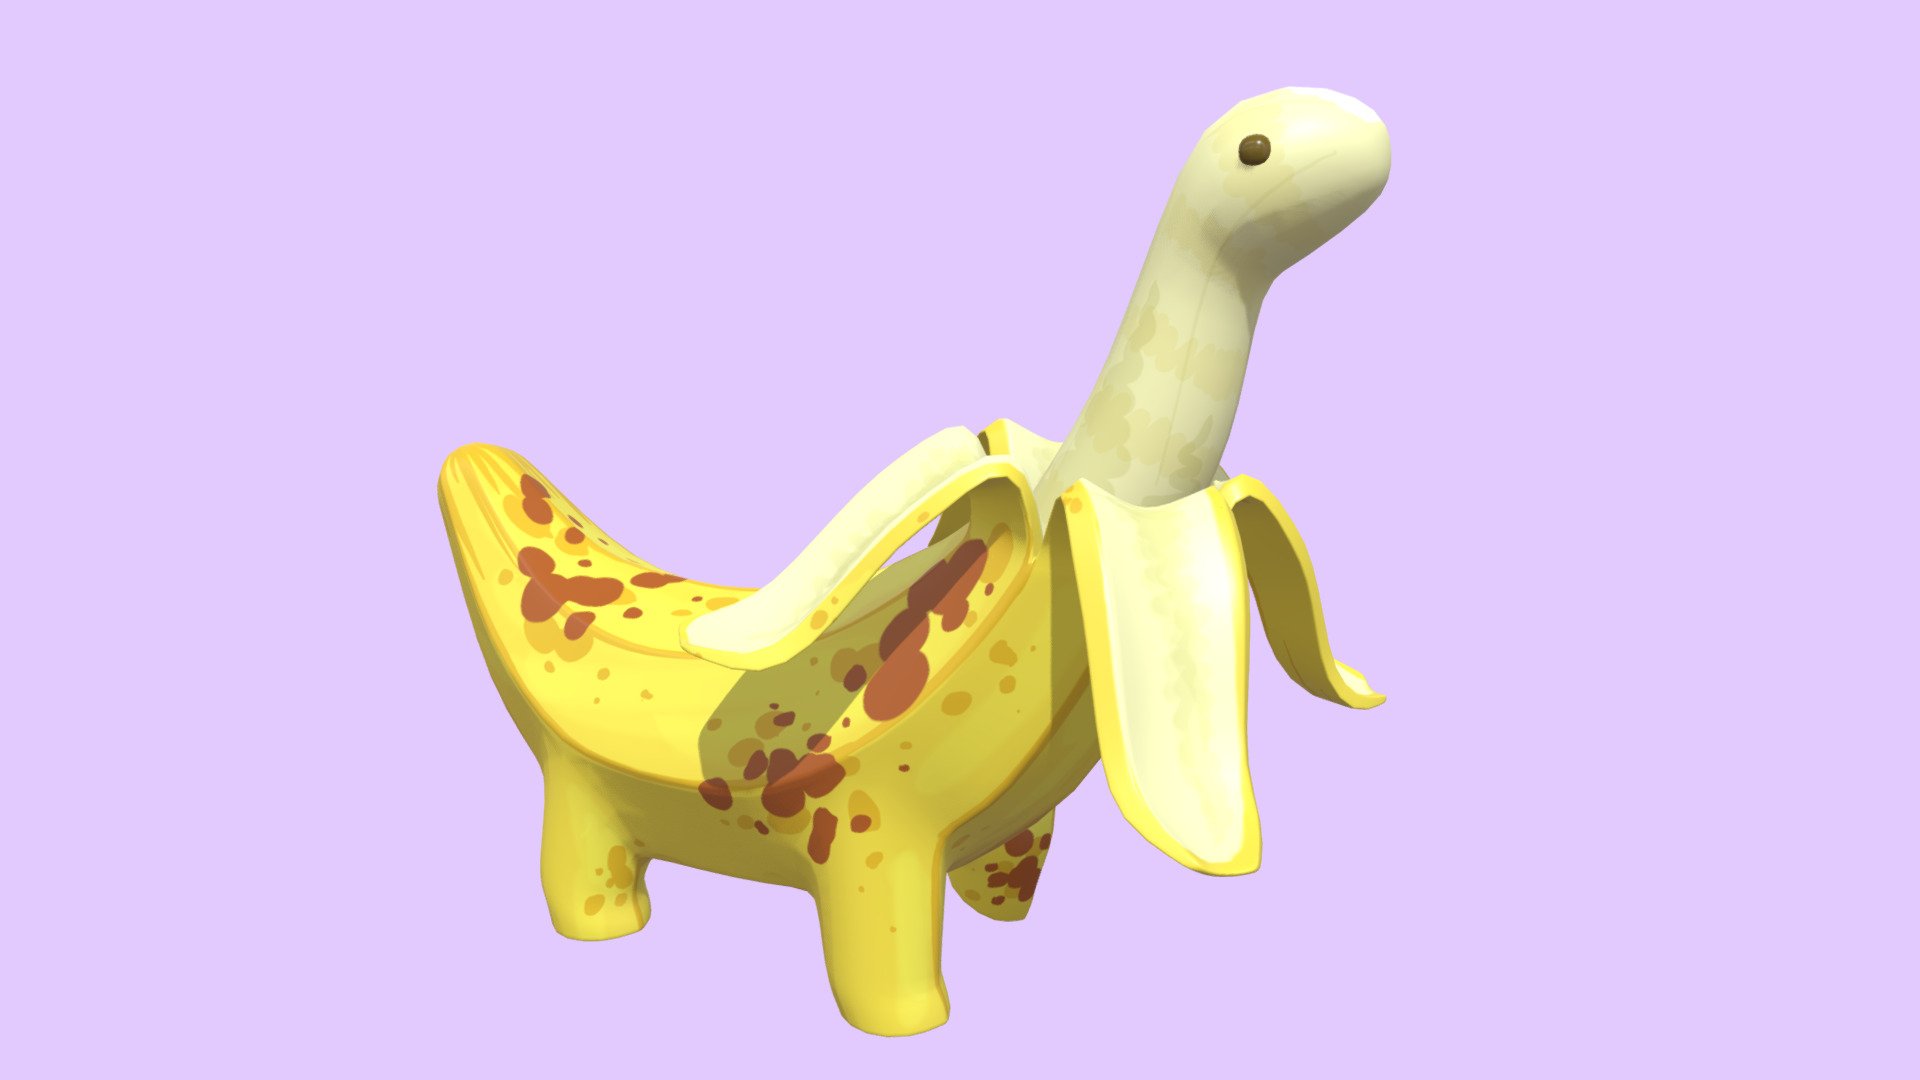 Original concept by the talented trisarahtops-sketches on tumblr. Her line of fruit dinosaurs is truly inspirational! So cute! 

Went simple shapes, and simple textures. A fun bananana-yellow-dinosaur.

Please check out the original artwork on her blog! - Bananasaurus - 3D model by Emily Funk (@efunk46) 3d model